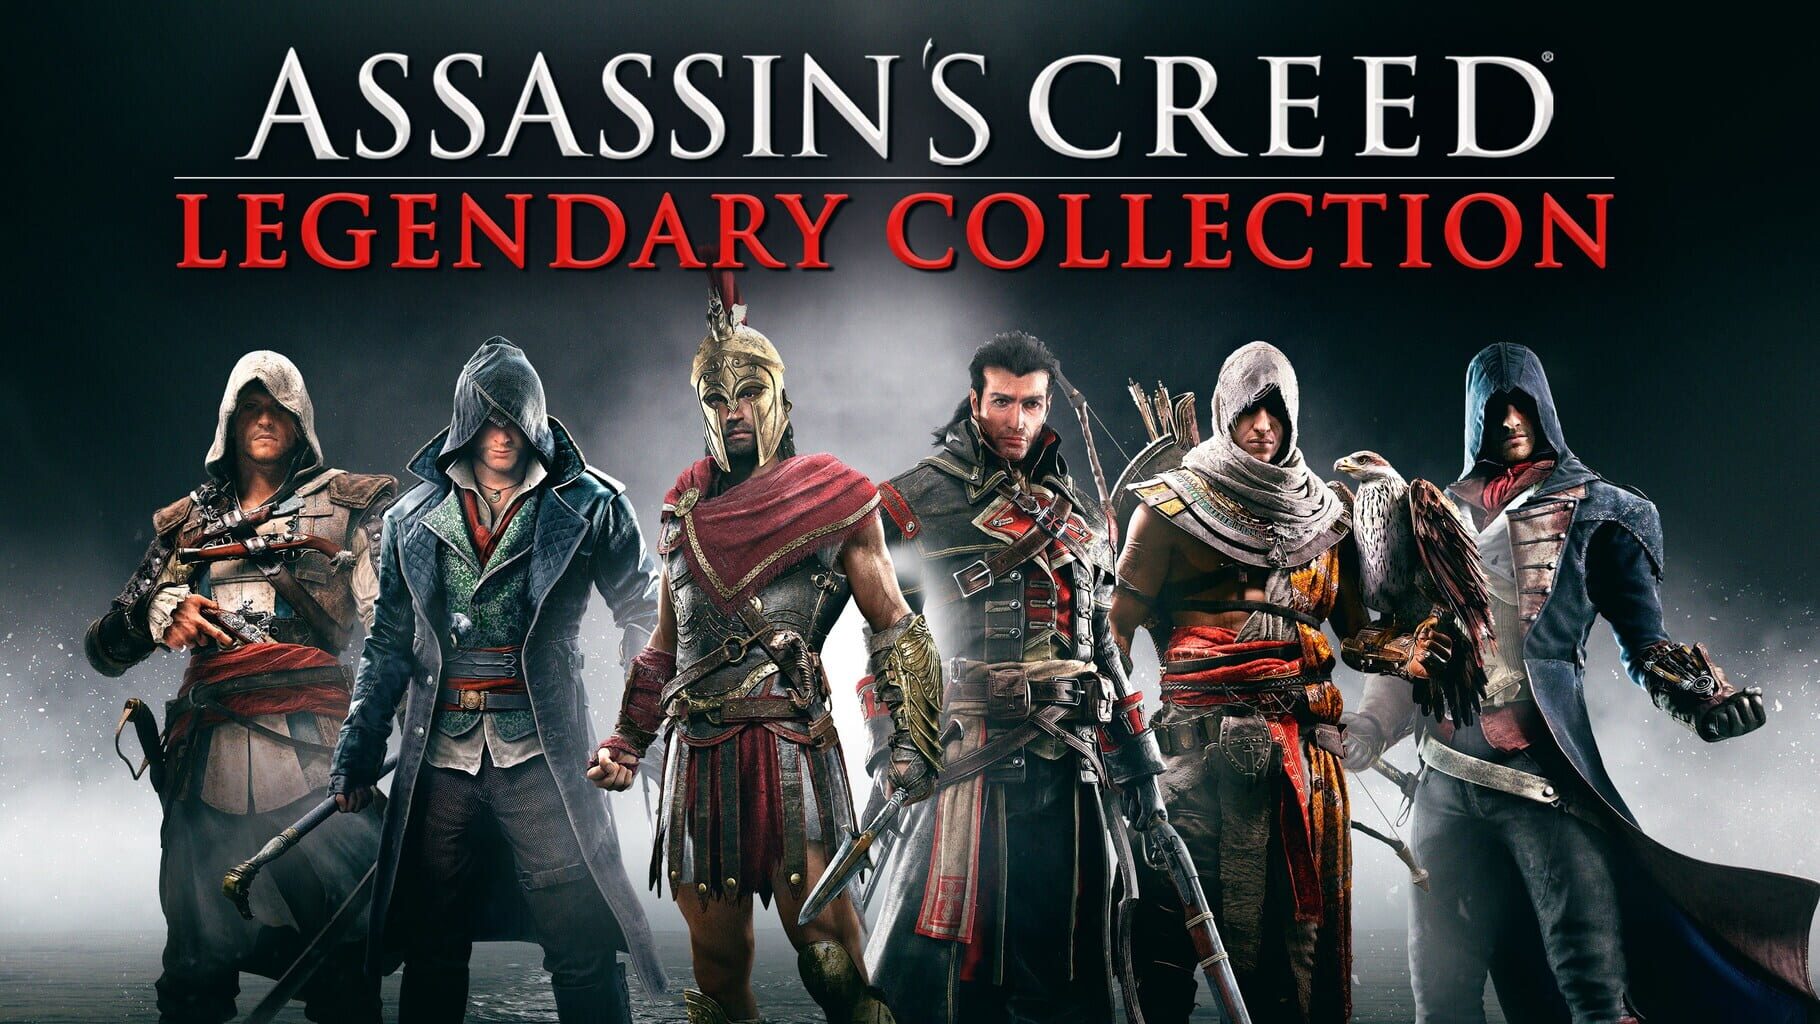 Arte - Assassin's Creed Legendary Collection